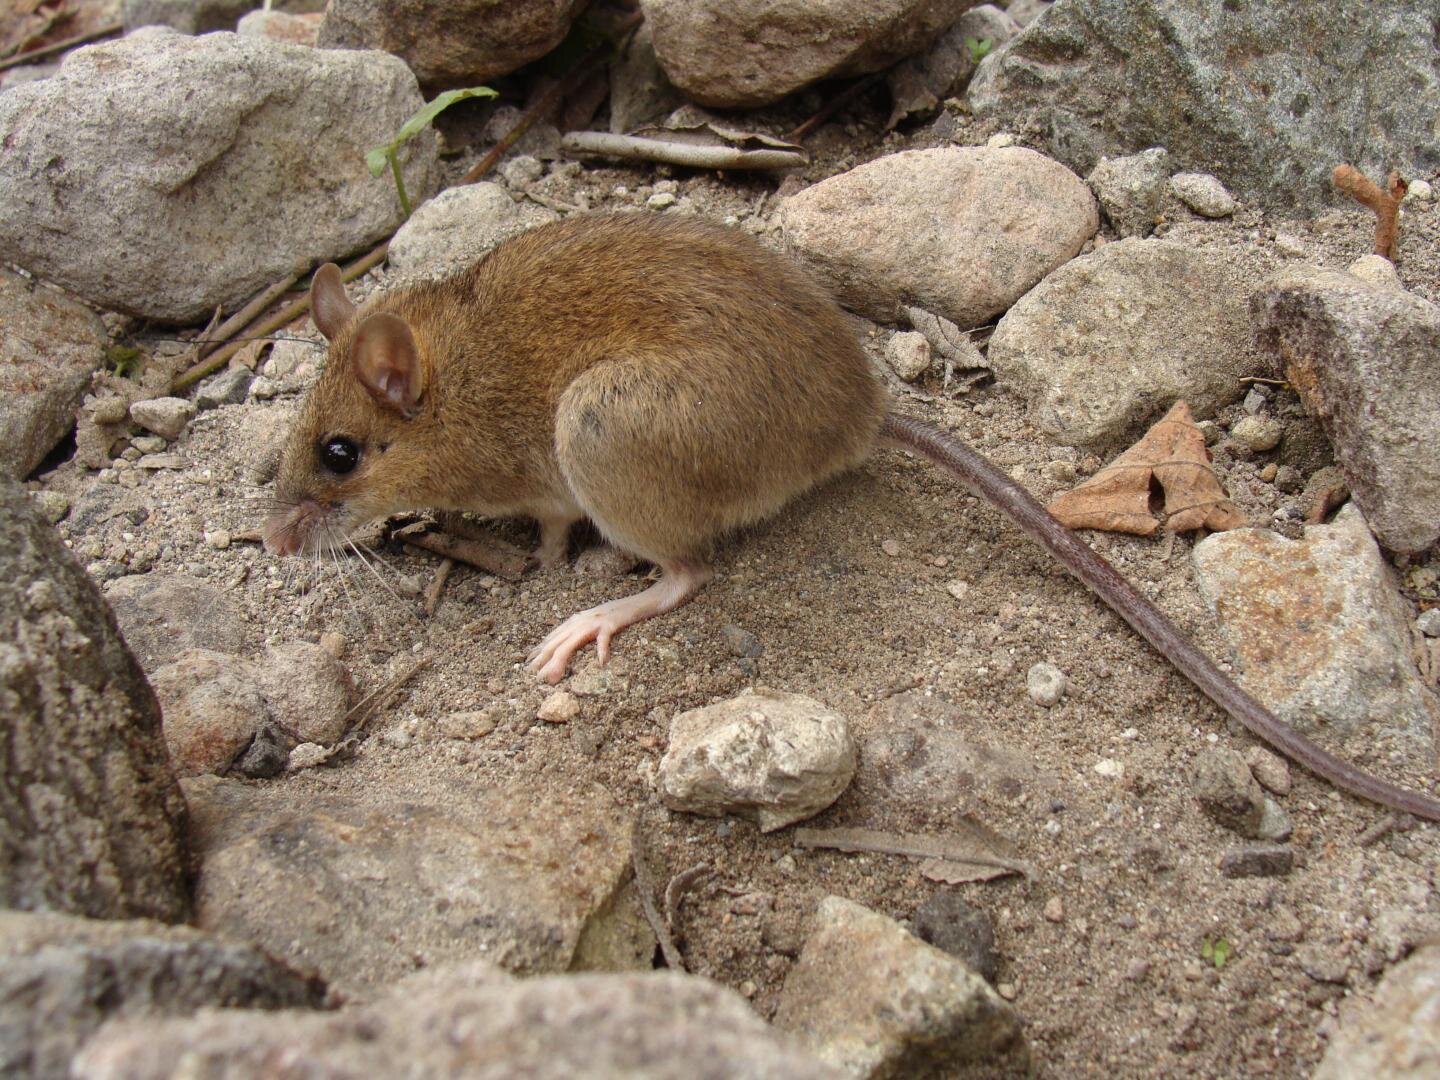 Rediscovery of the 'extinct' Pinatubo volcano mouse